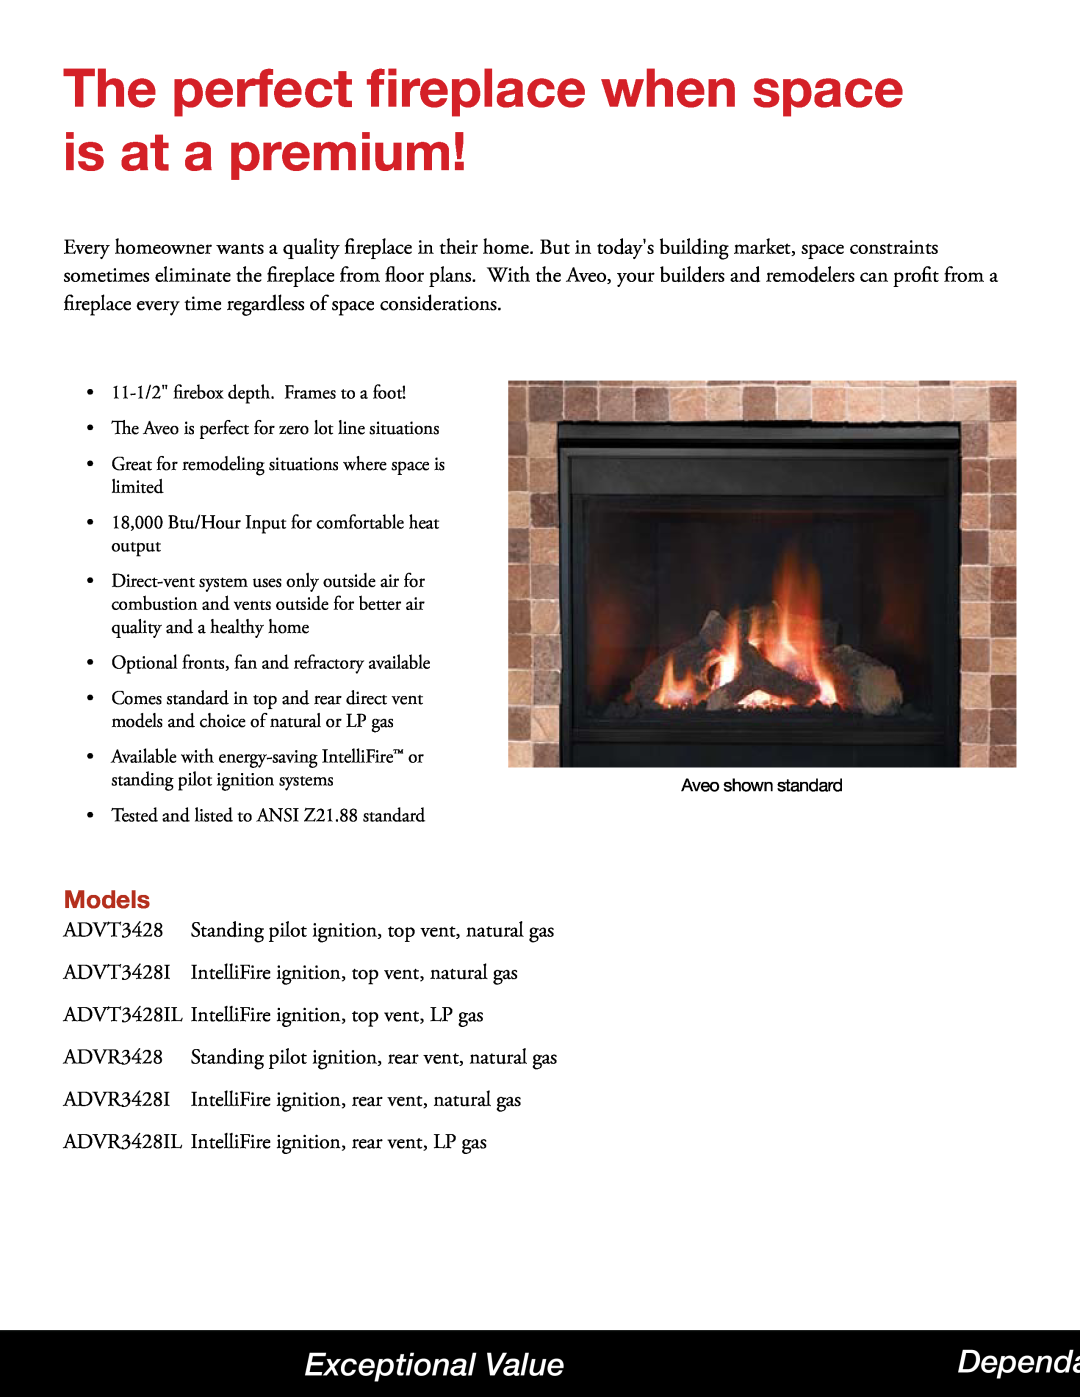 Hearth and Home Technologies Aveo Exceptional Value, Models, The perfect fireplace when space is at a premium, Dependa 